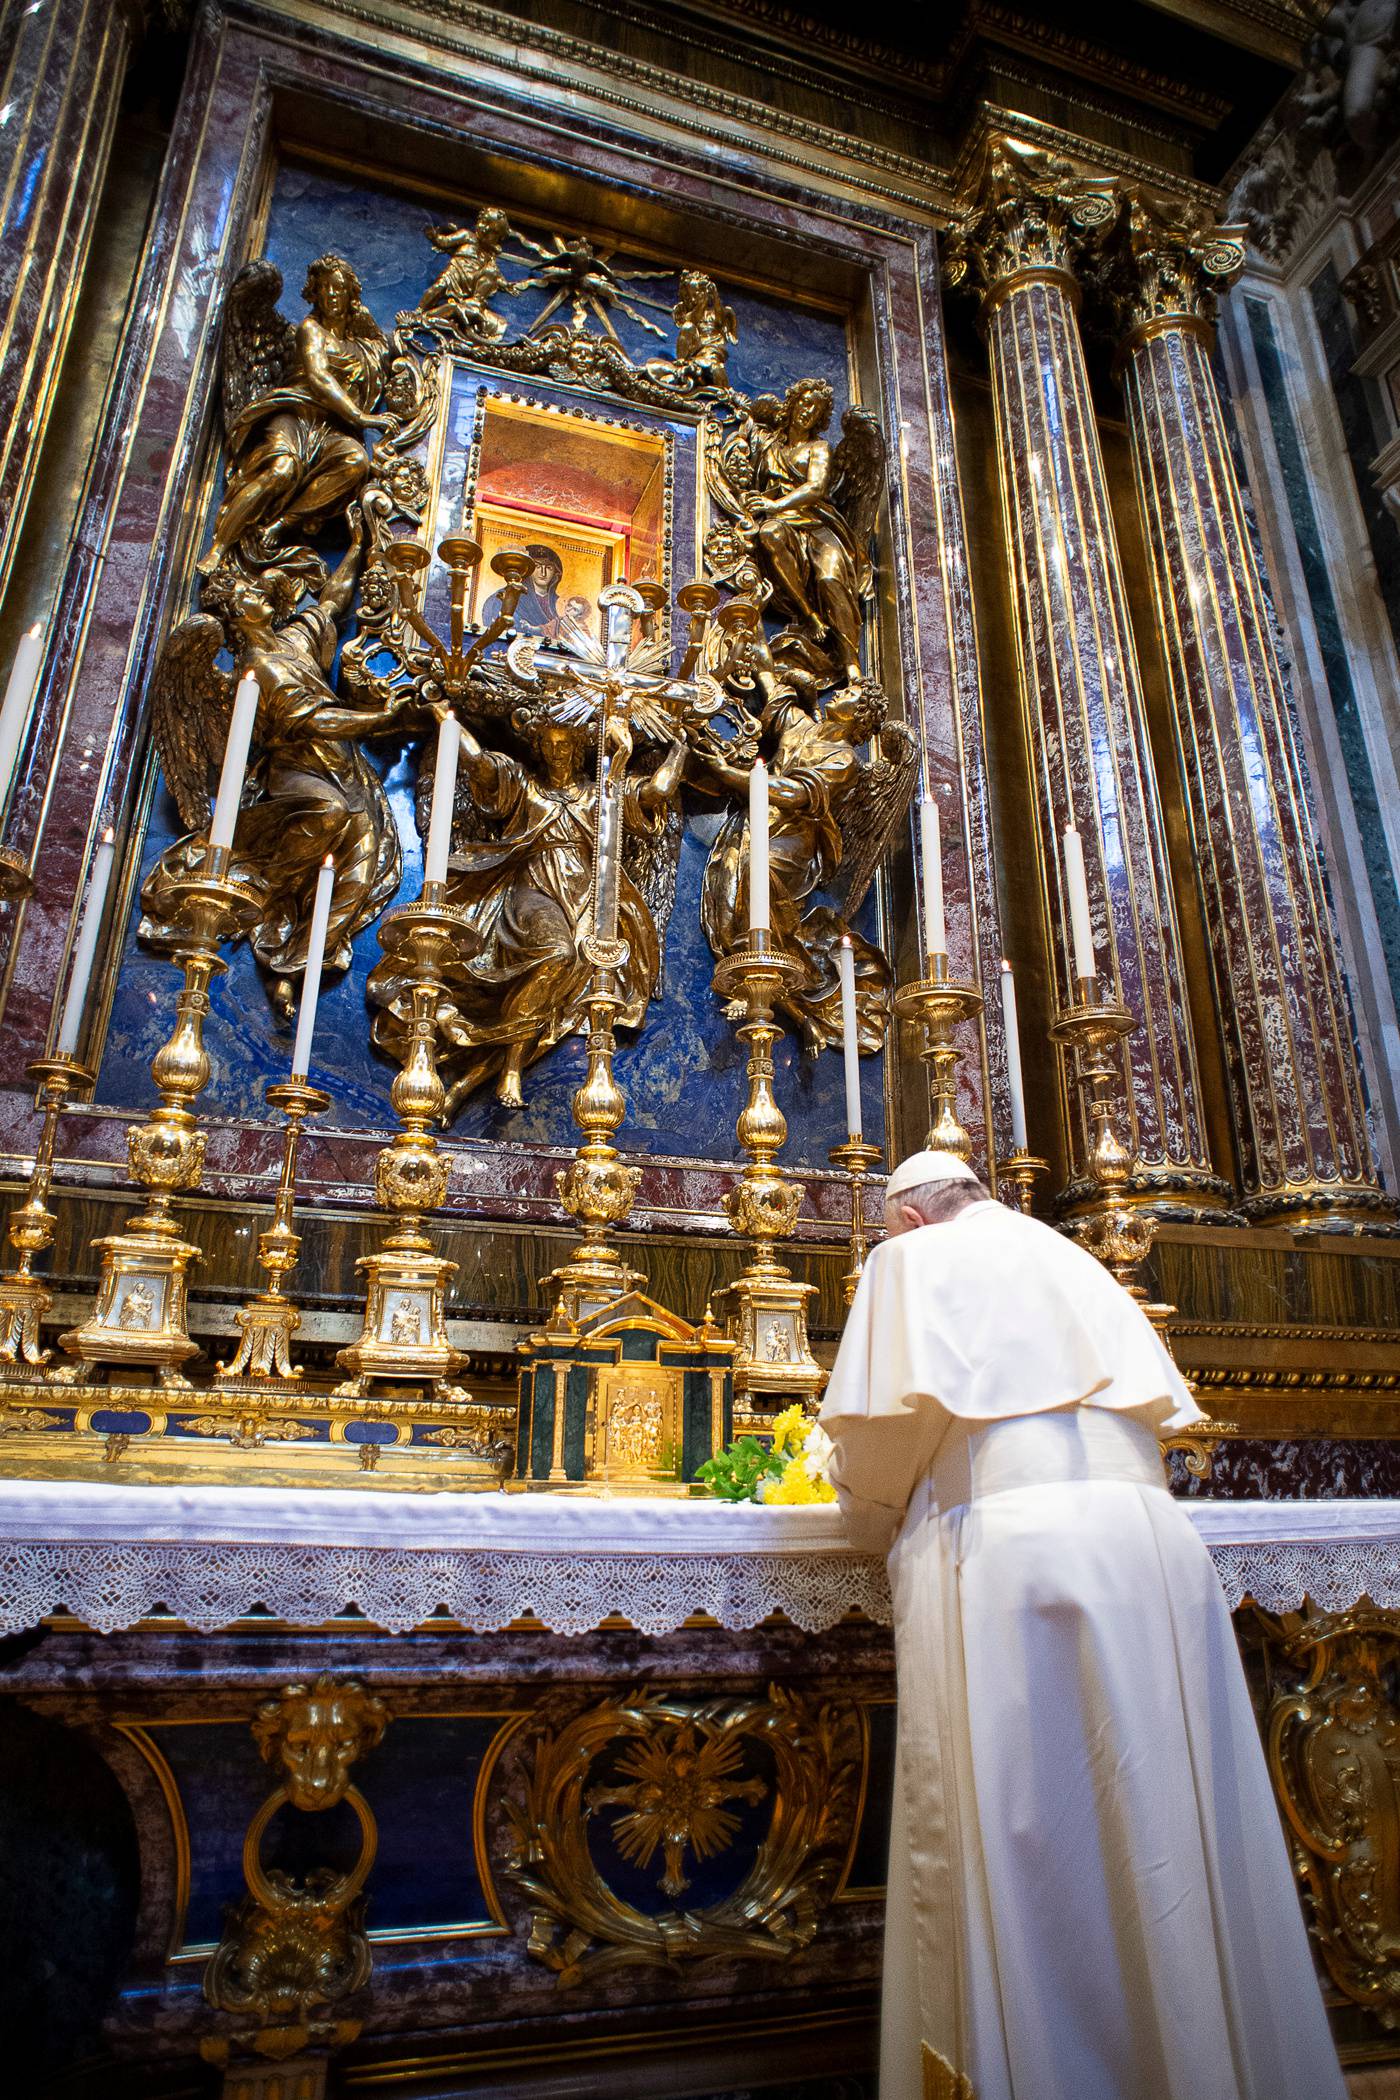 Pope Francis prays at the Santa Maria Maggiore basilica for the end of the coronavirus pandemic, in Rome